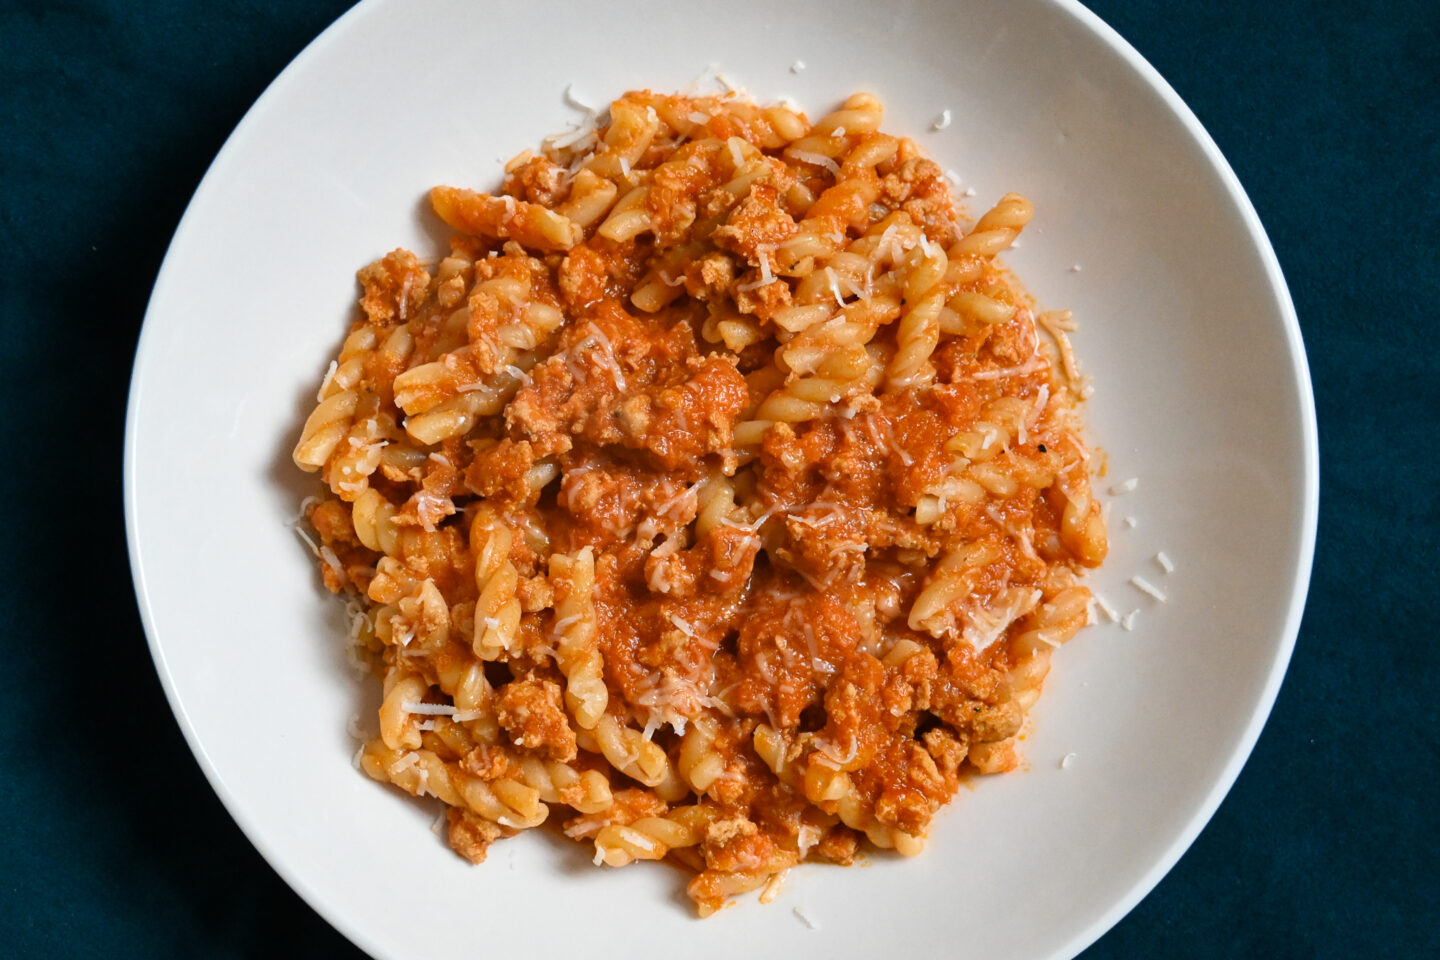 Gemelli Pasta With Chicken Bolognese Sauce sprinkled with Parmesan cheese over top on a white plate with a blue & white striped background